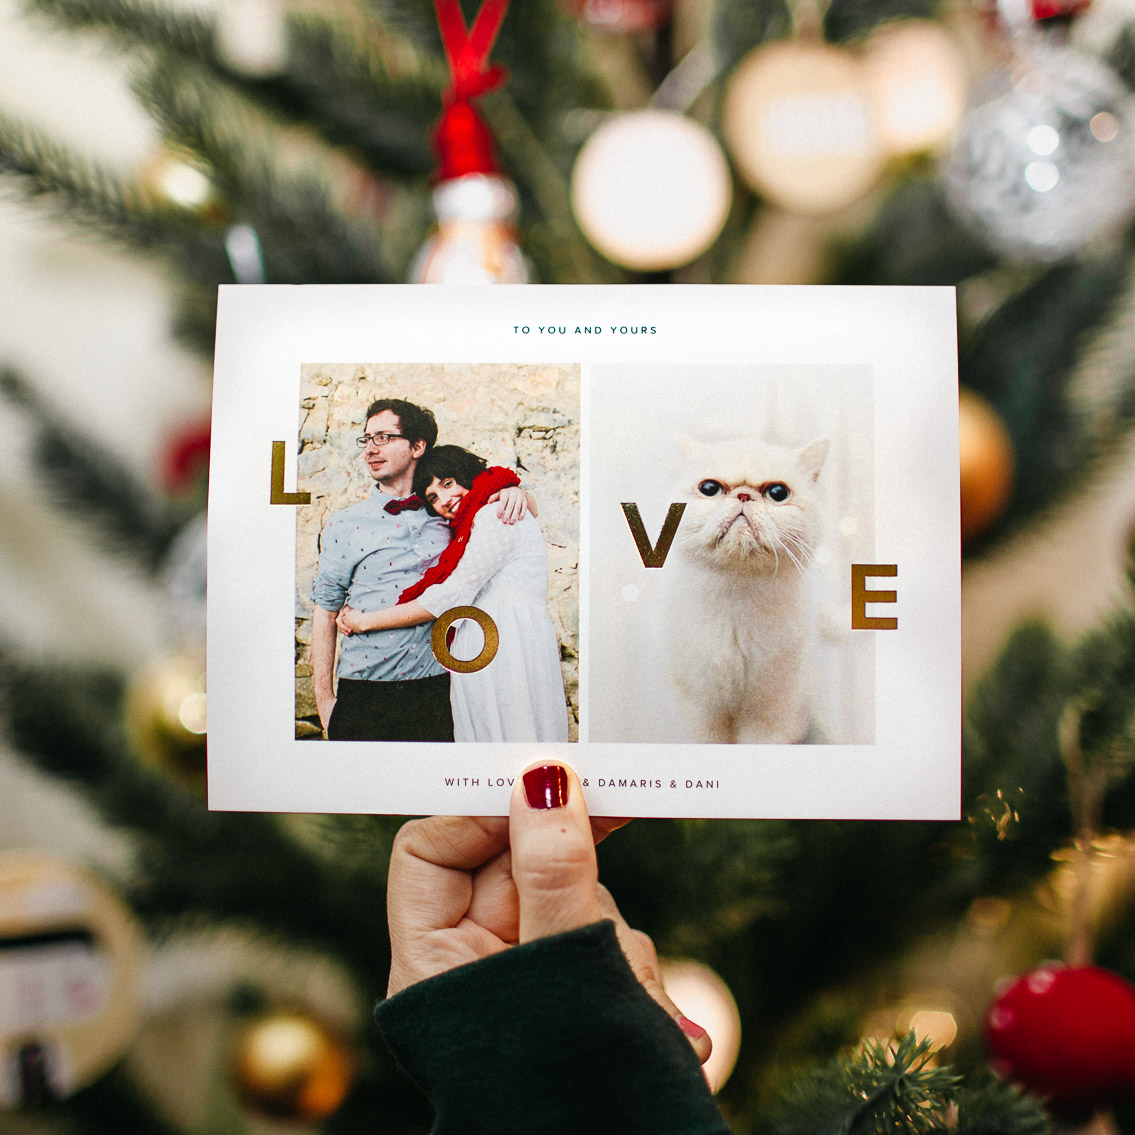 Happy Christmas - The cat, you and us